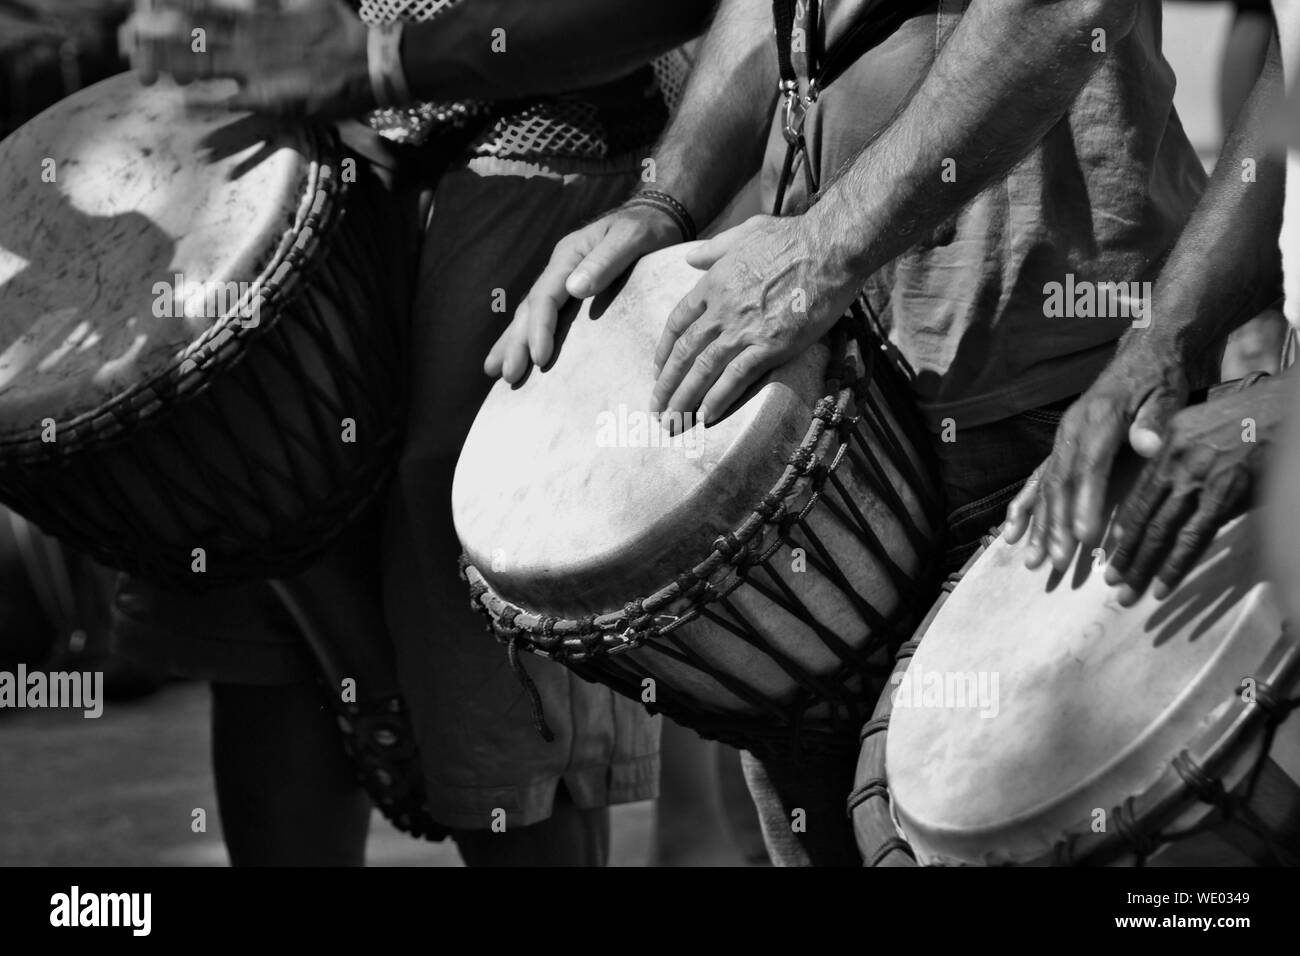 Midsection Of Men Playing Drums Stock Photo